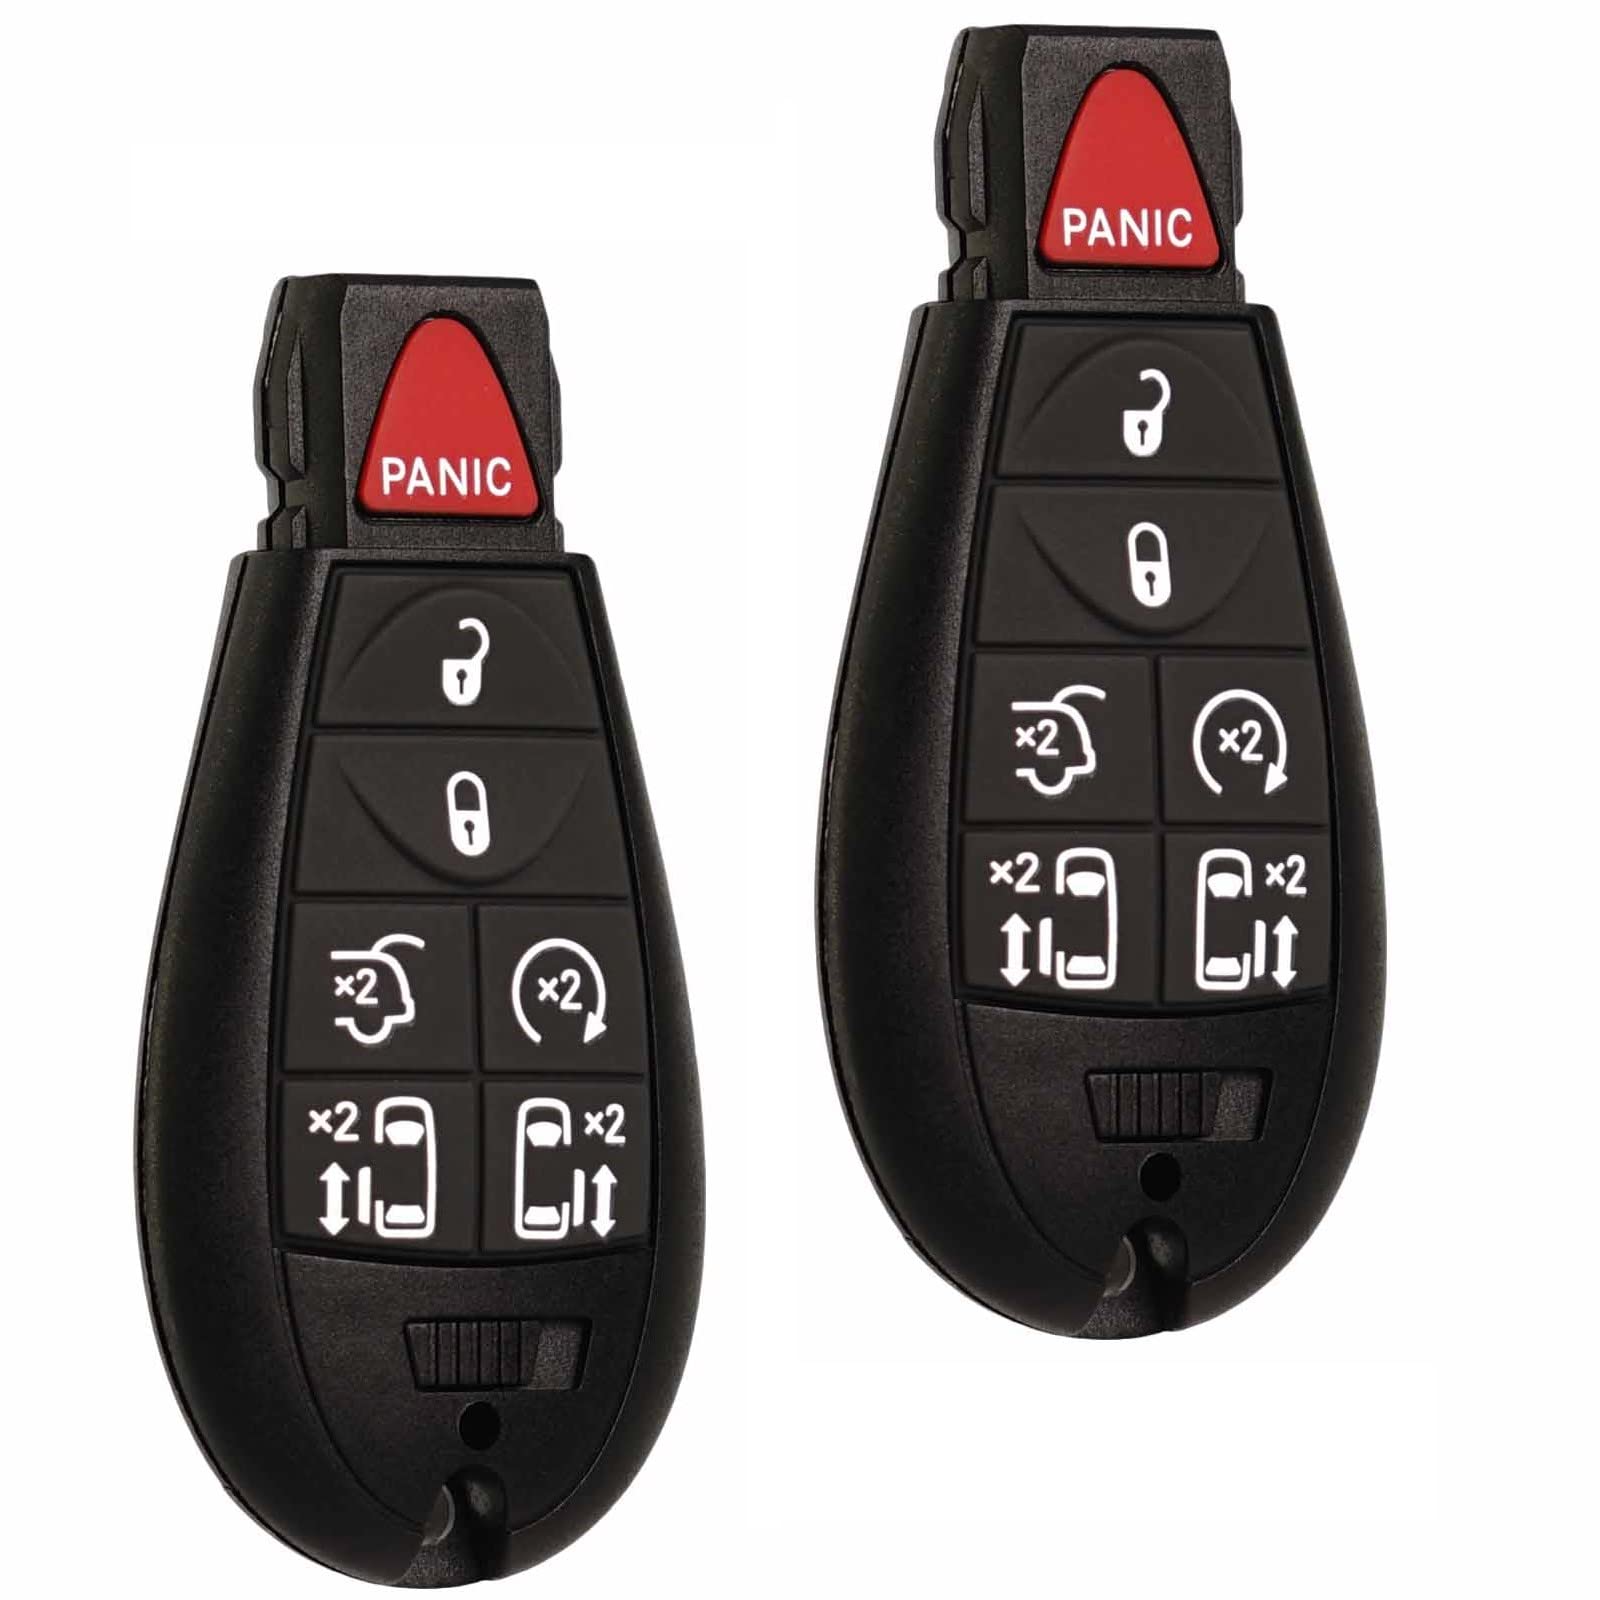 Keyless Entry Remote Control Key Fob FOBIK Replacement Fits for Dodge Grand Caravan 2008-2020 Chrysler Town Country Volkswagen Routan IYZ-C01C M3N5WY783X 56046709